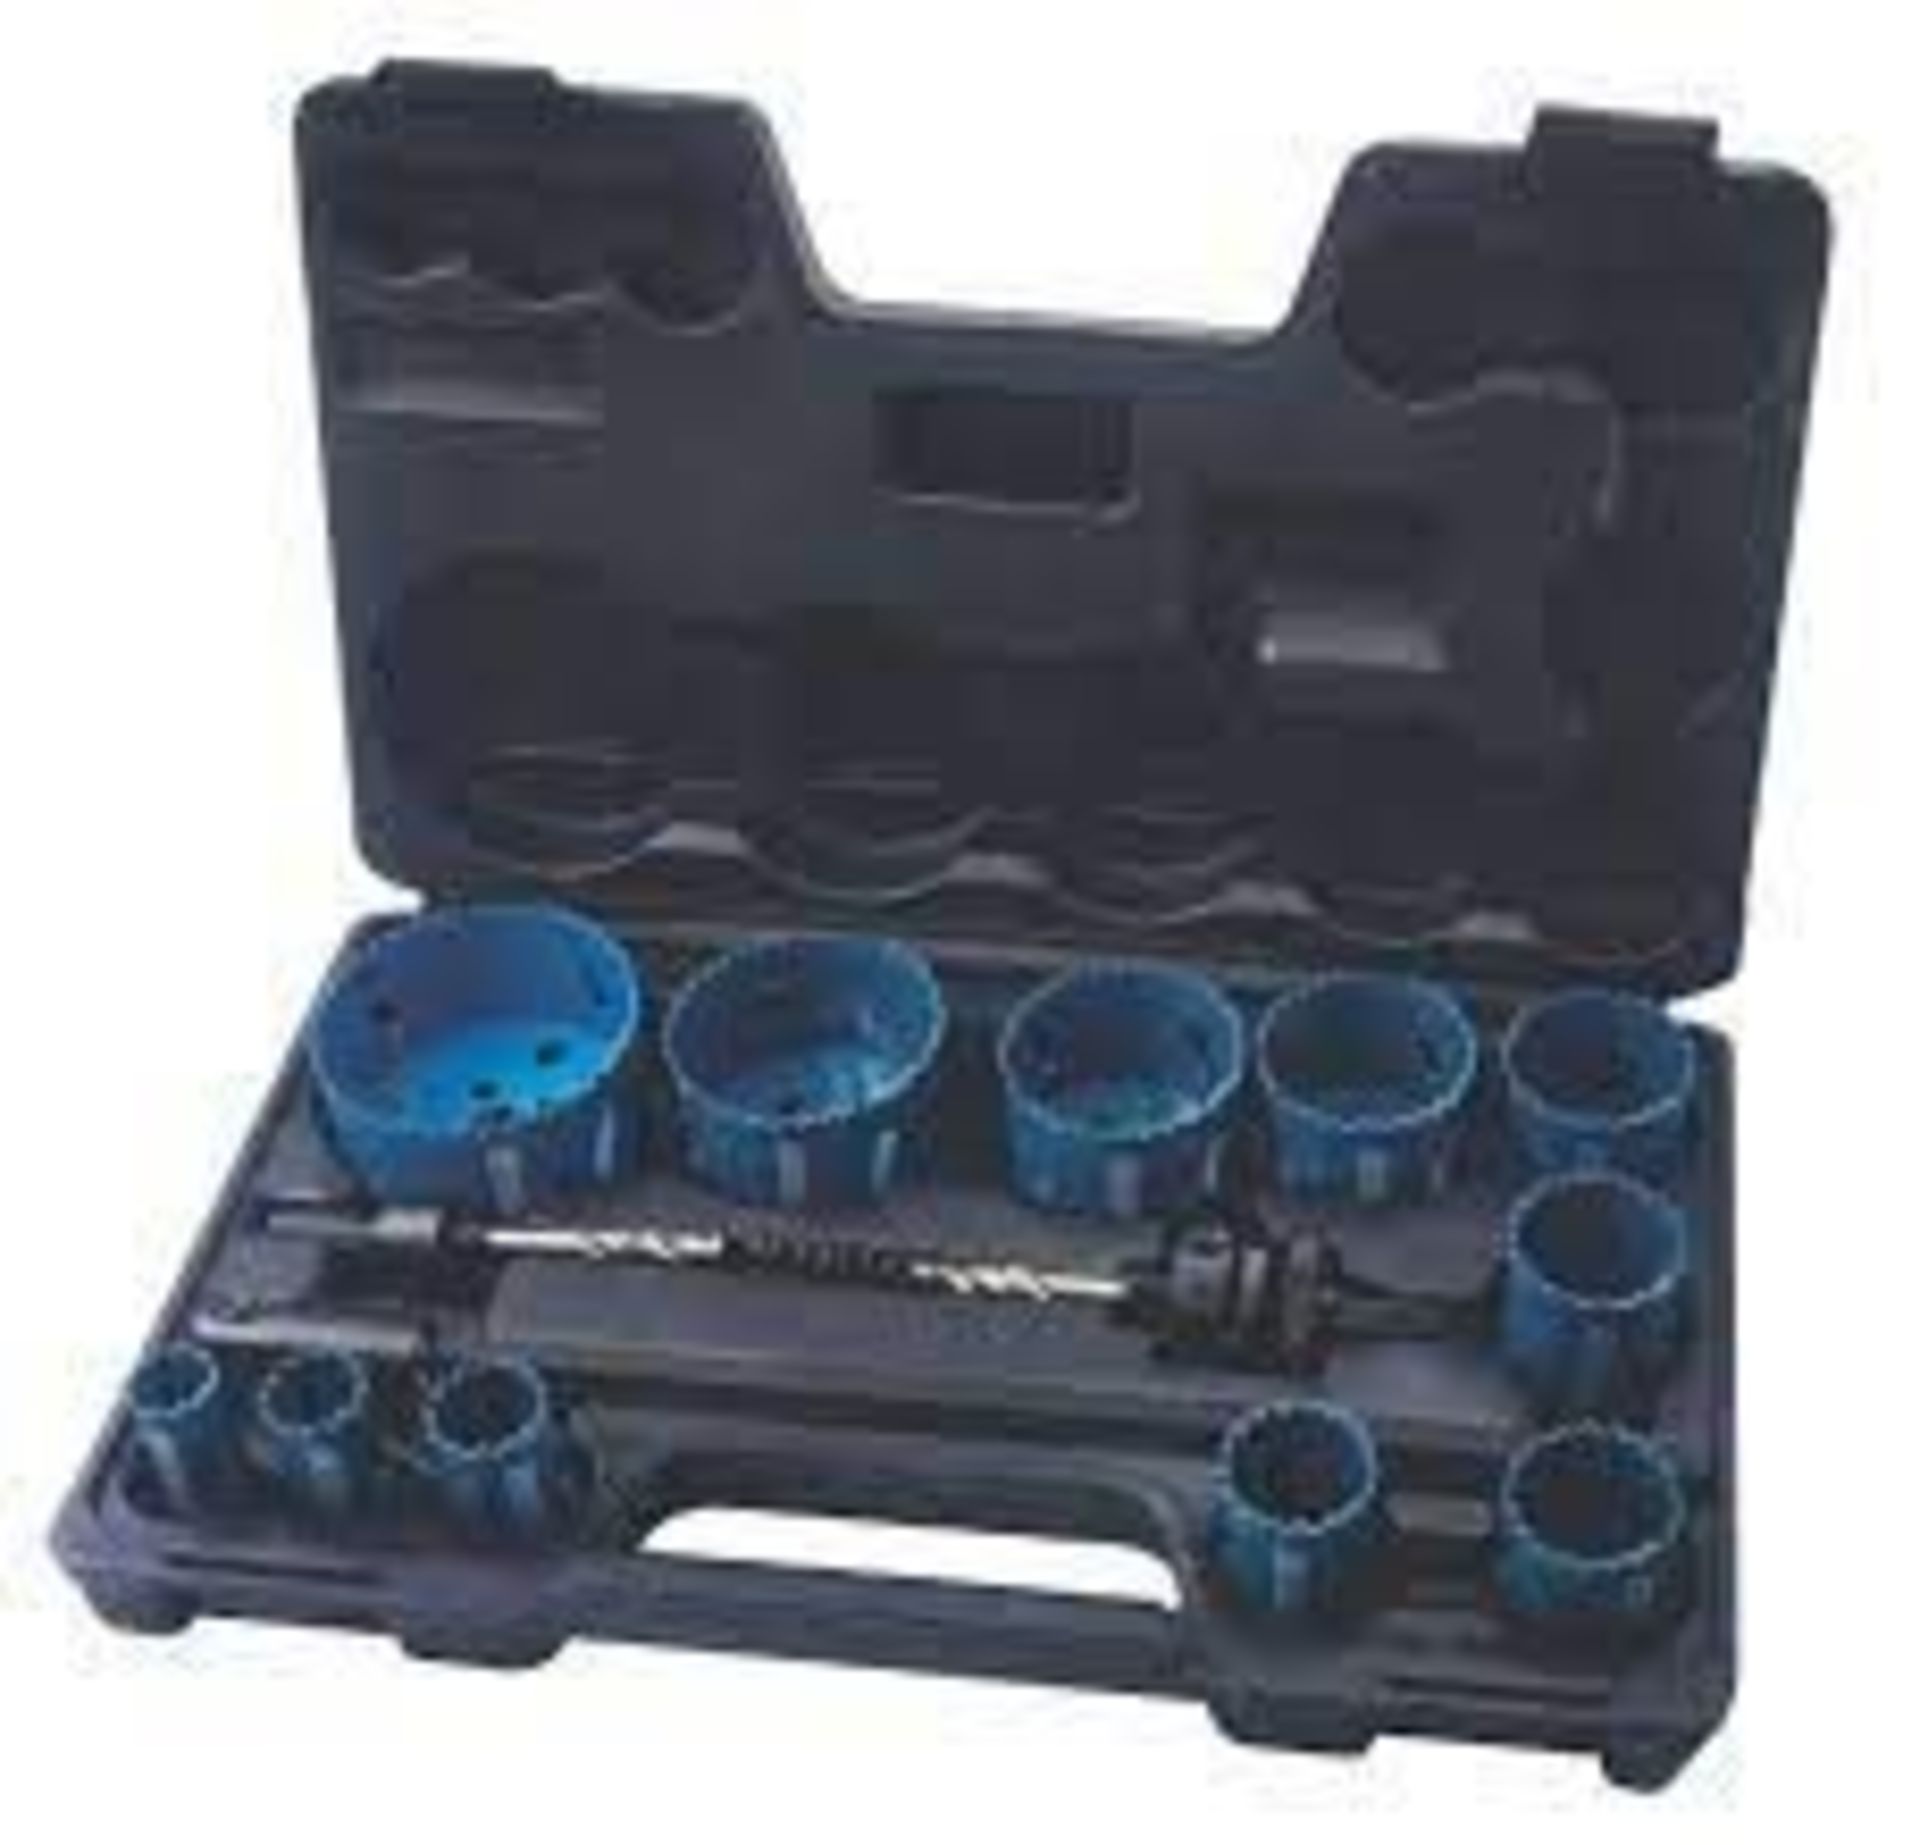 ERBAUER PROFESSIONAL 11-SAW MULTI-MATERIAL HOLESAW SET. - R13a.10. Suitable for wood, laminate,